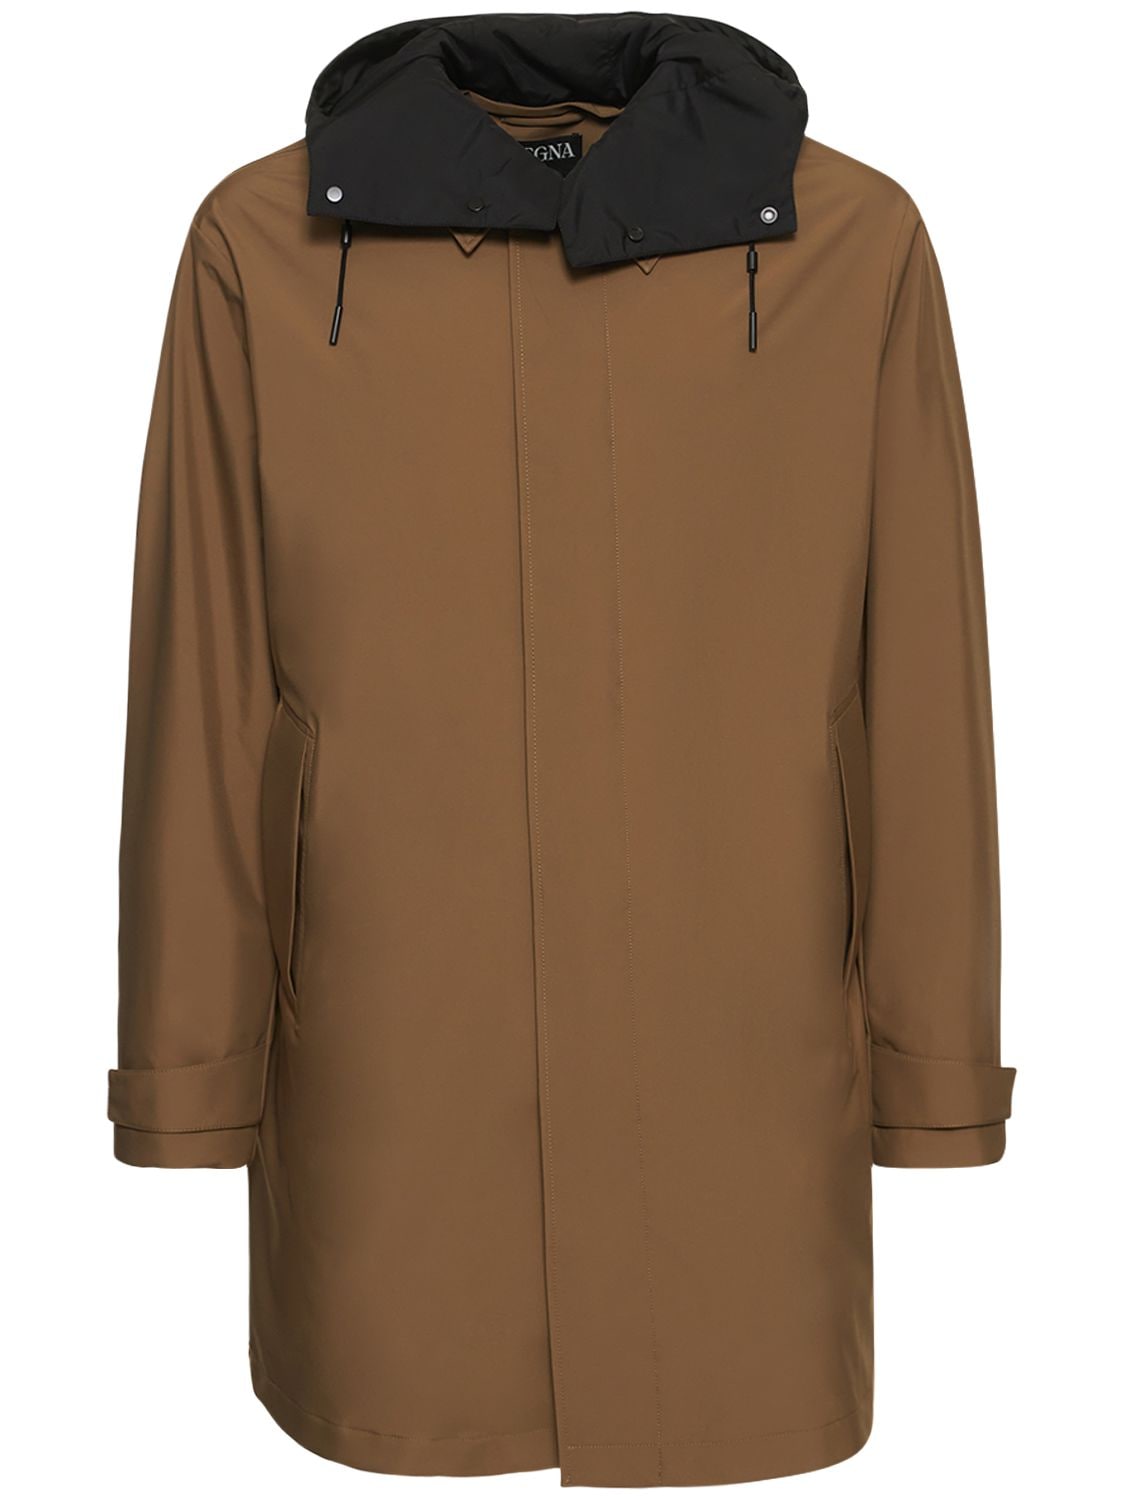 Image of Stratos Parka